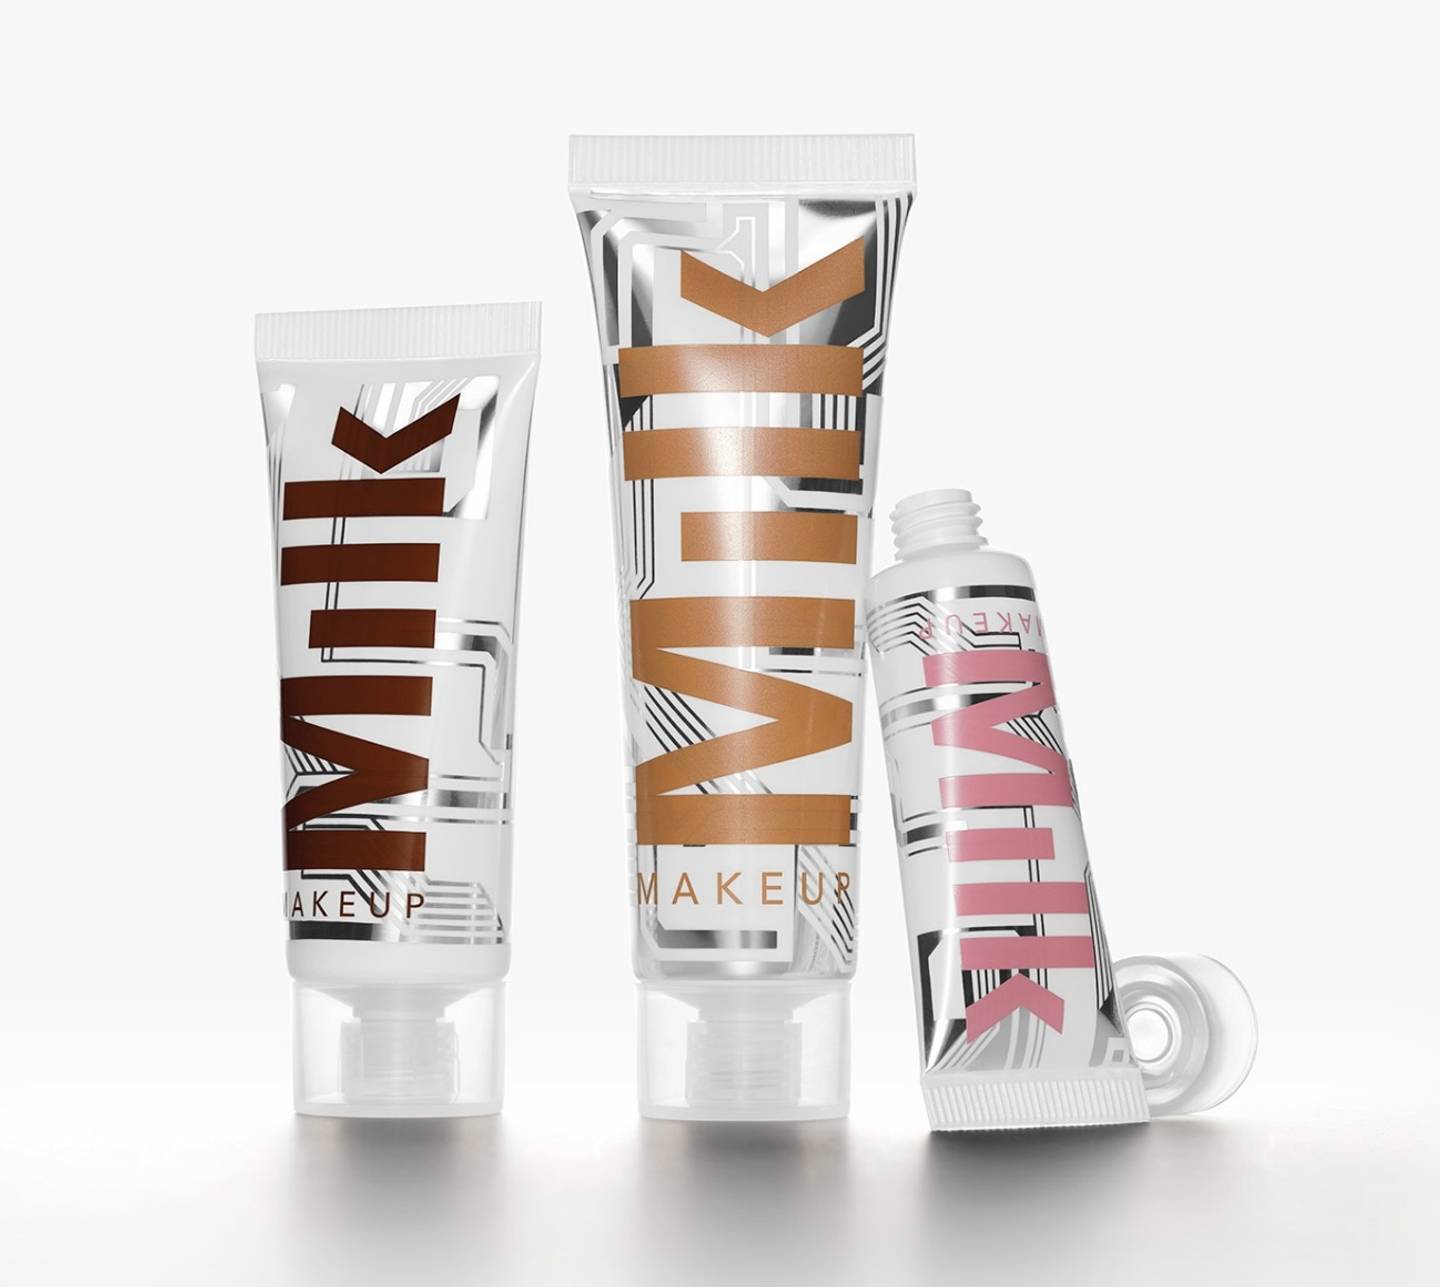 Milk Makeup Bionic Fam Lined Up Next to One Another